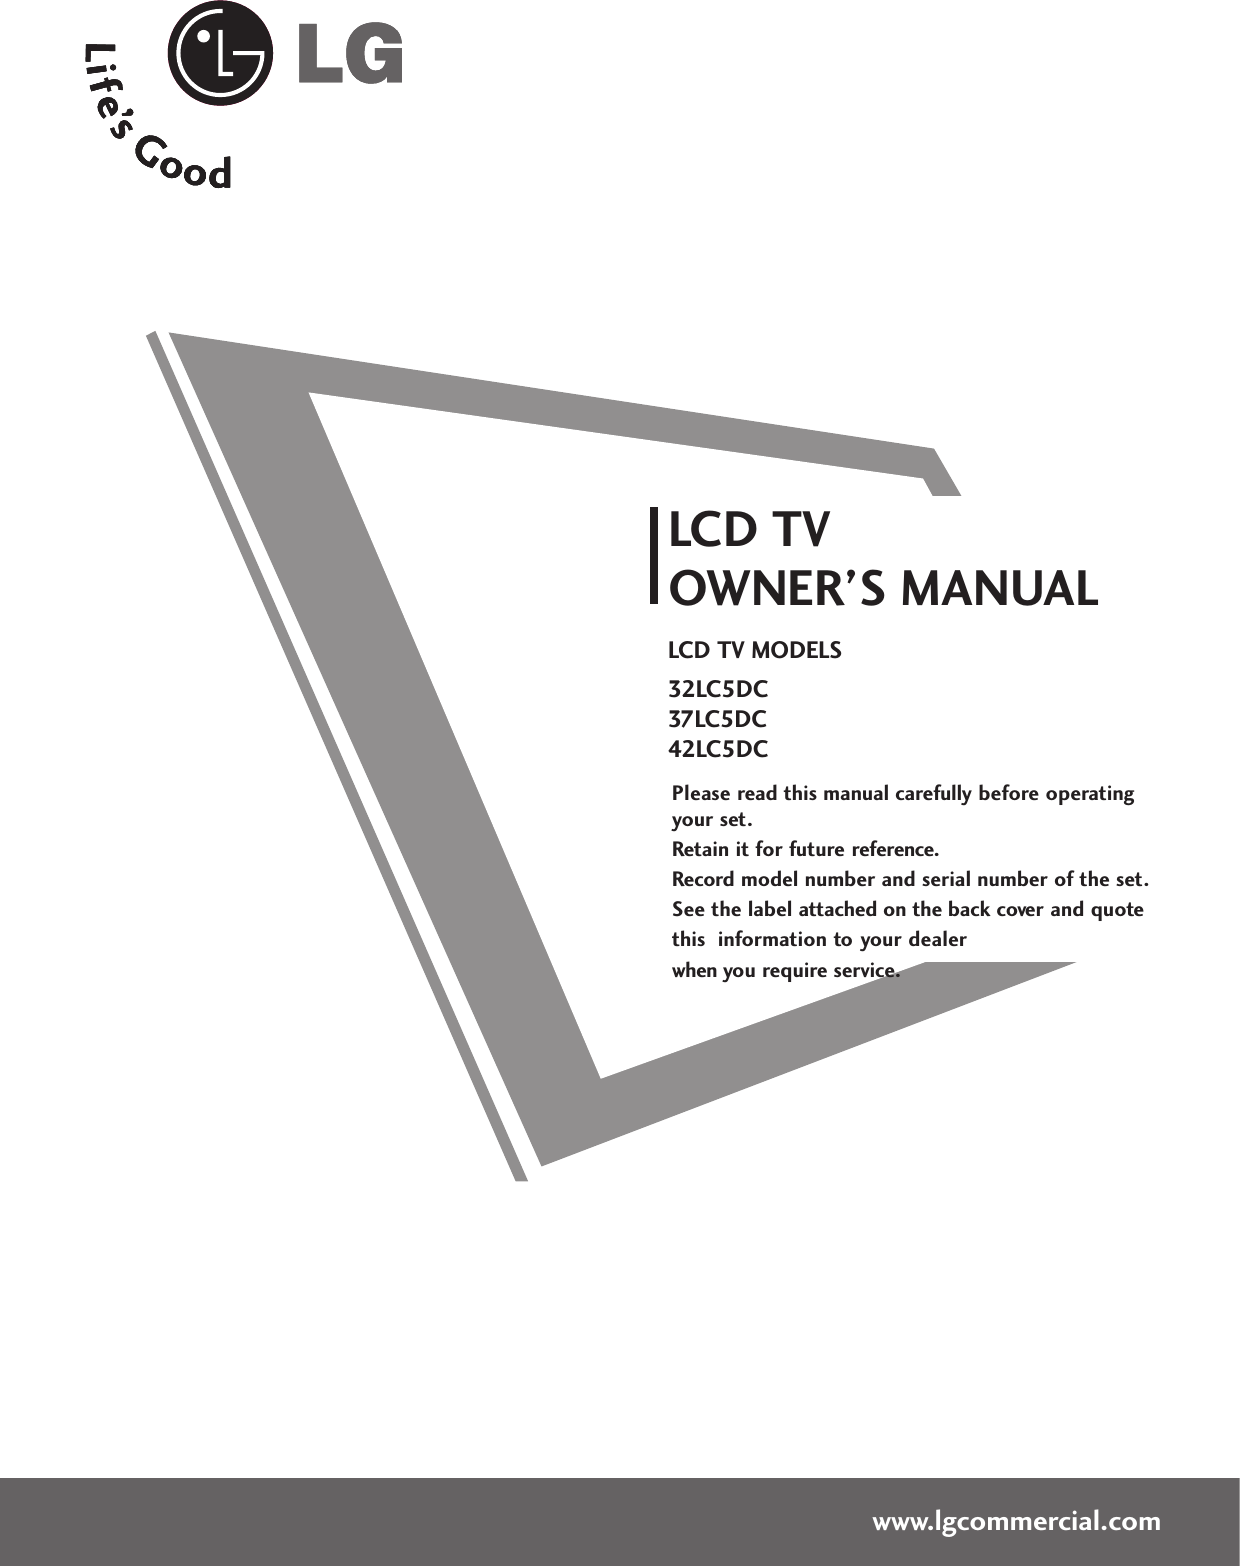 Please read this manual carefully before operatingyour set. Retain it for future reference.Record model number and serial number of the set. See the label attached on the back cover and quote this  information to your dealer when you require service.LCD TVOWNER’S MANUALLCD TV MODELS32LC5DC37LC5DC42LC5DCwww.lgcommercial.com